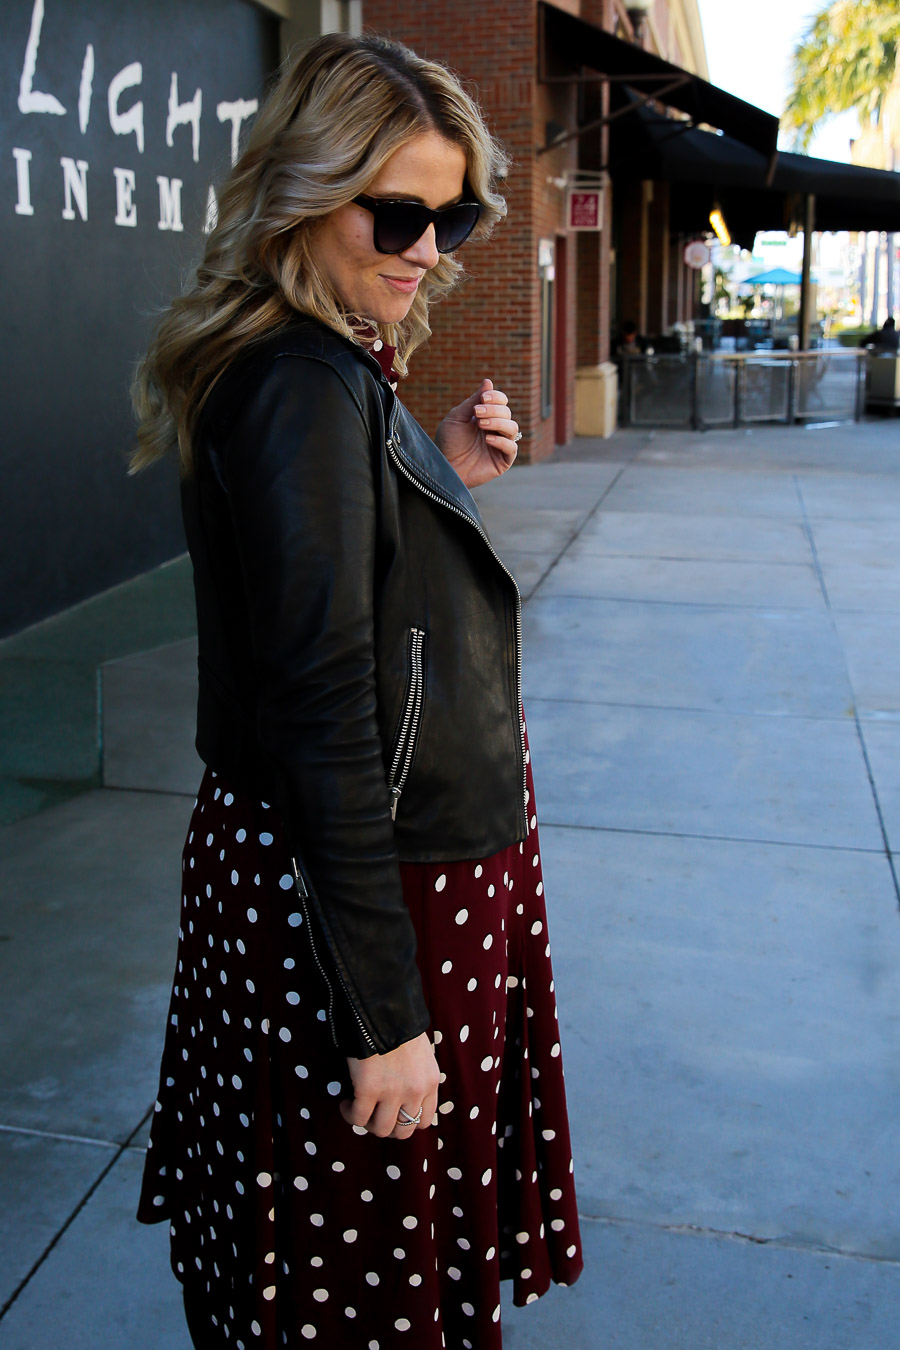 Maternity Dress Outfit with Leather Jacket - Leather Jacket Outfits